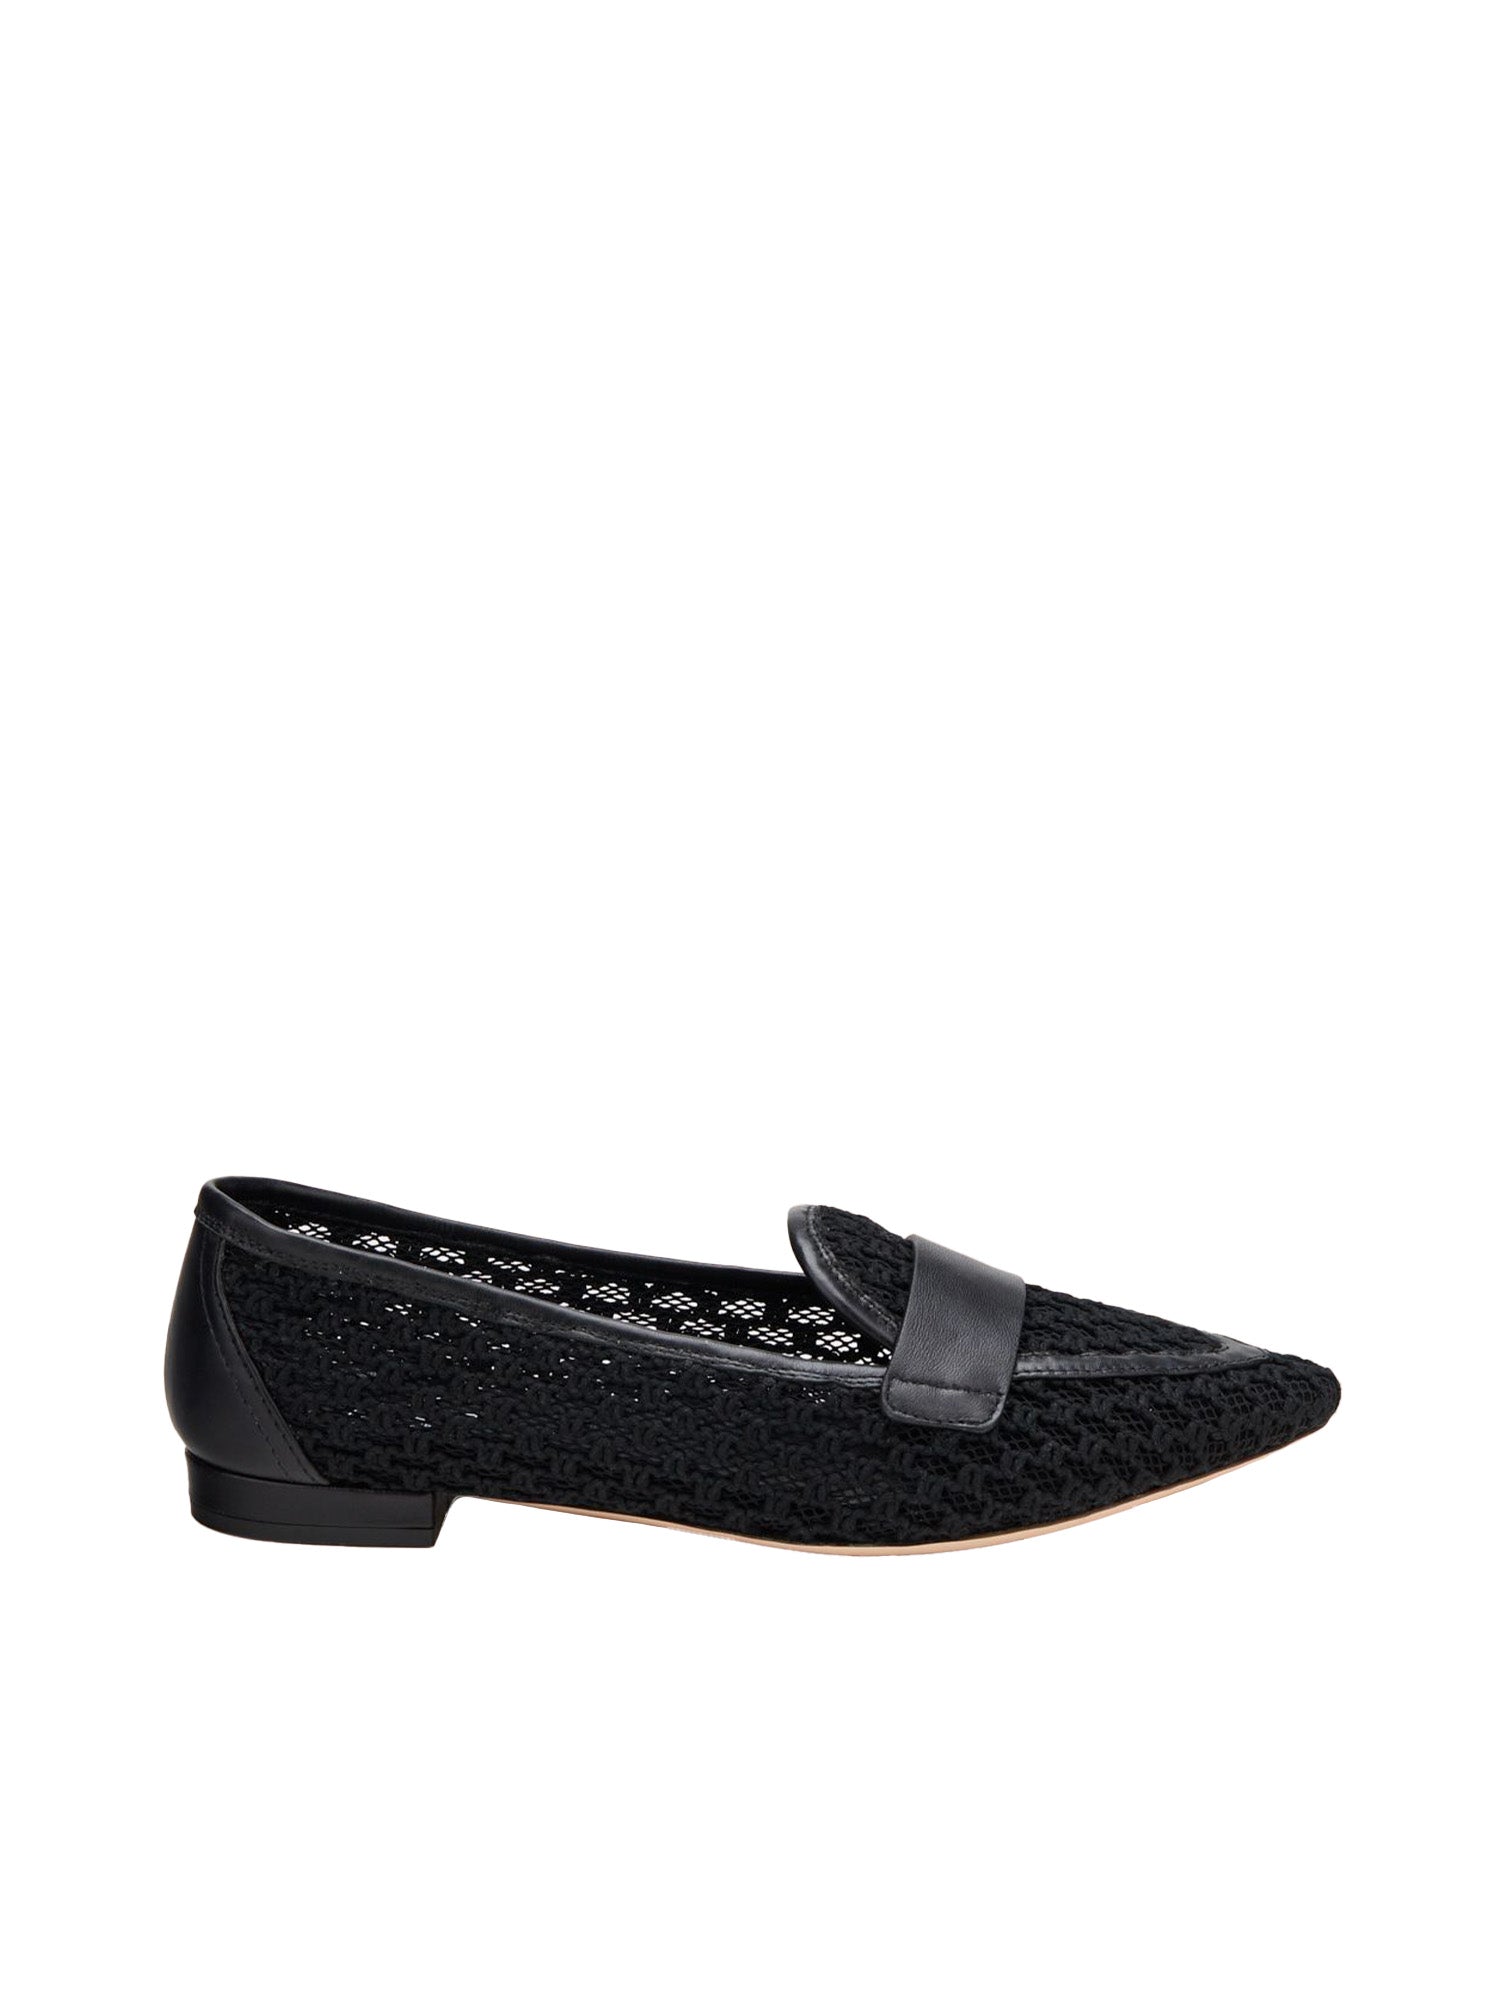 AGL Blanca Woven Loafers